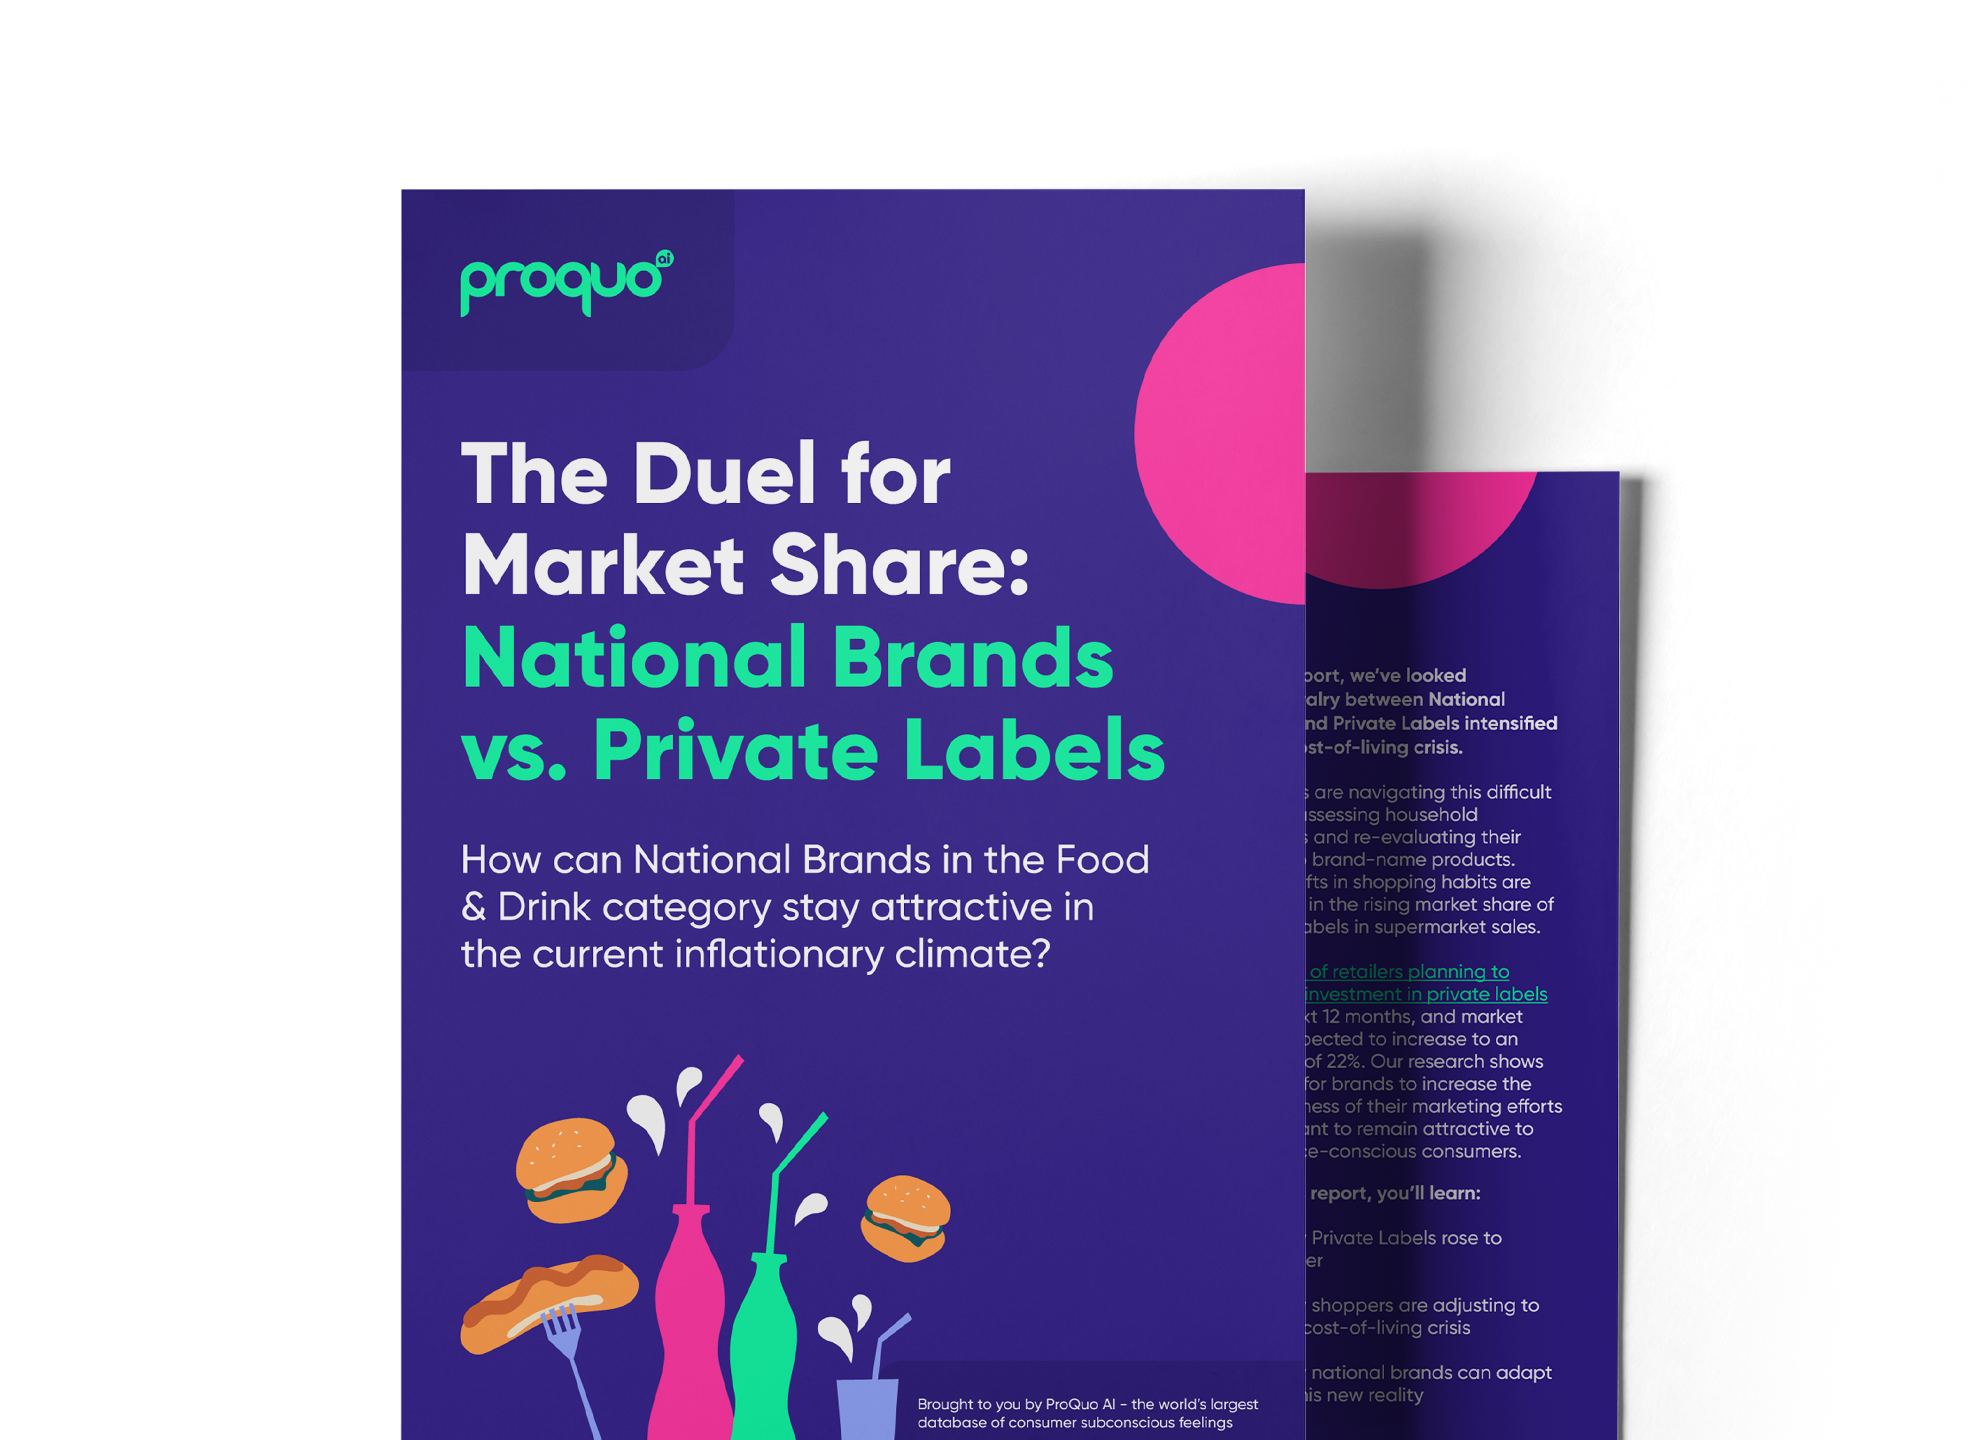 The Duel for Market Share: National Brands vs Private Label